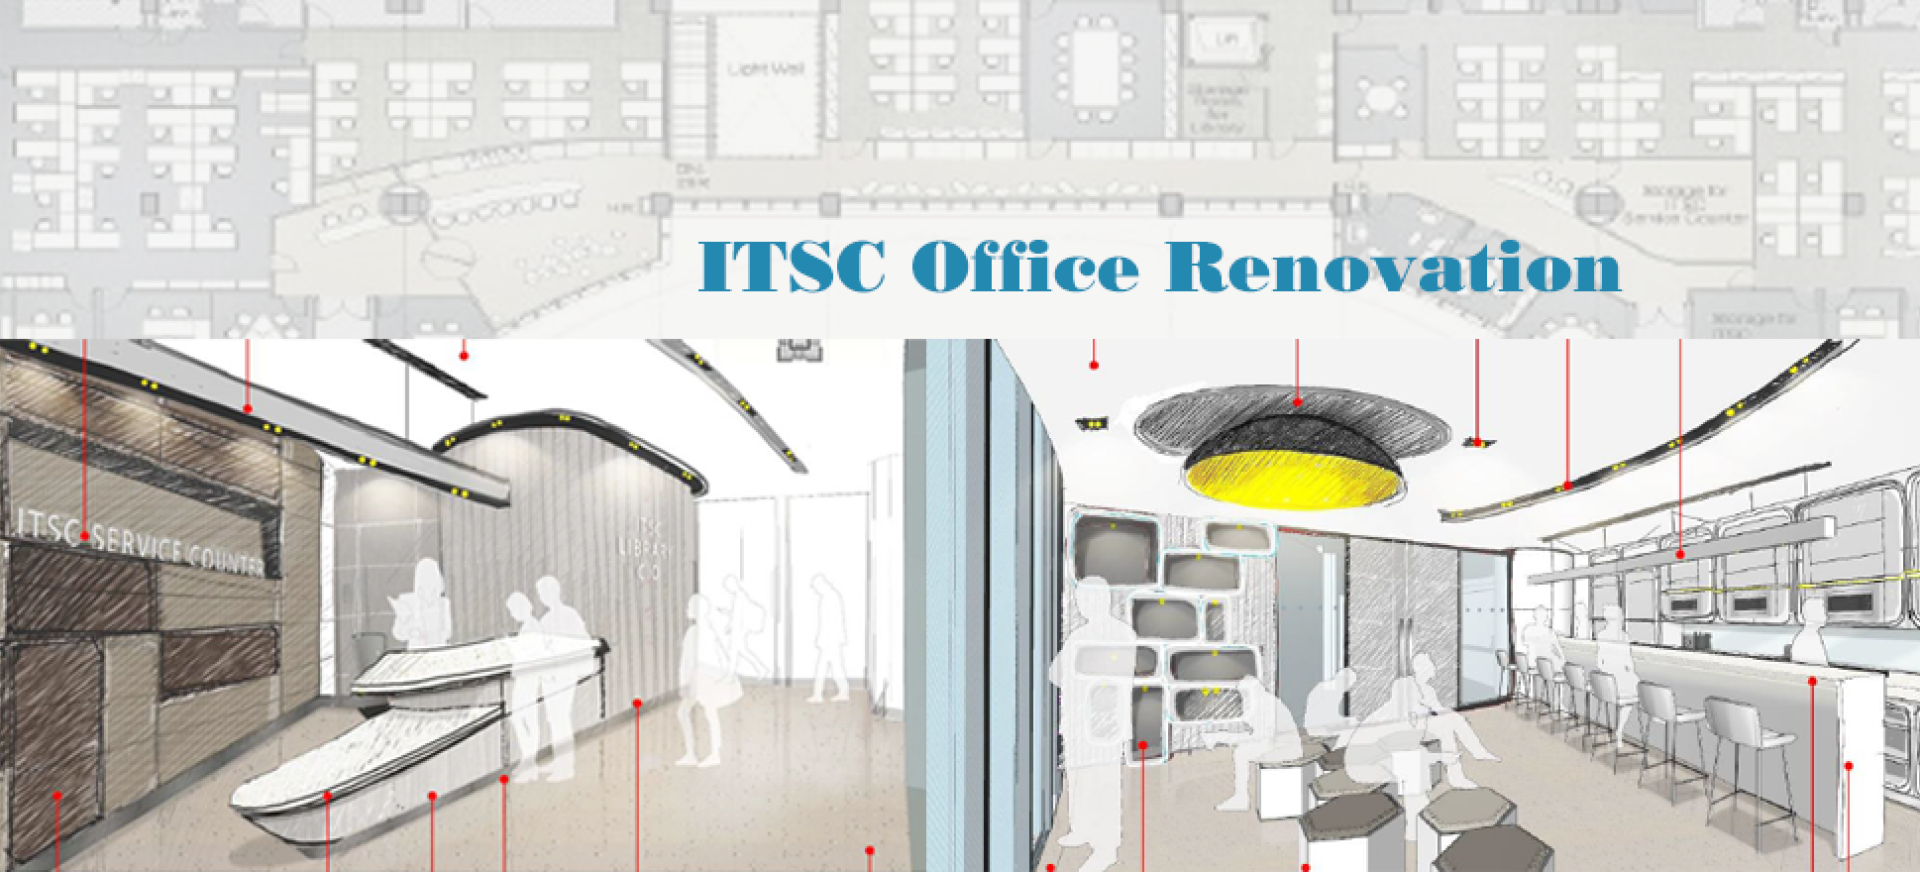 Issue 13 - ITSC Office Renovation